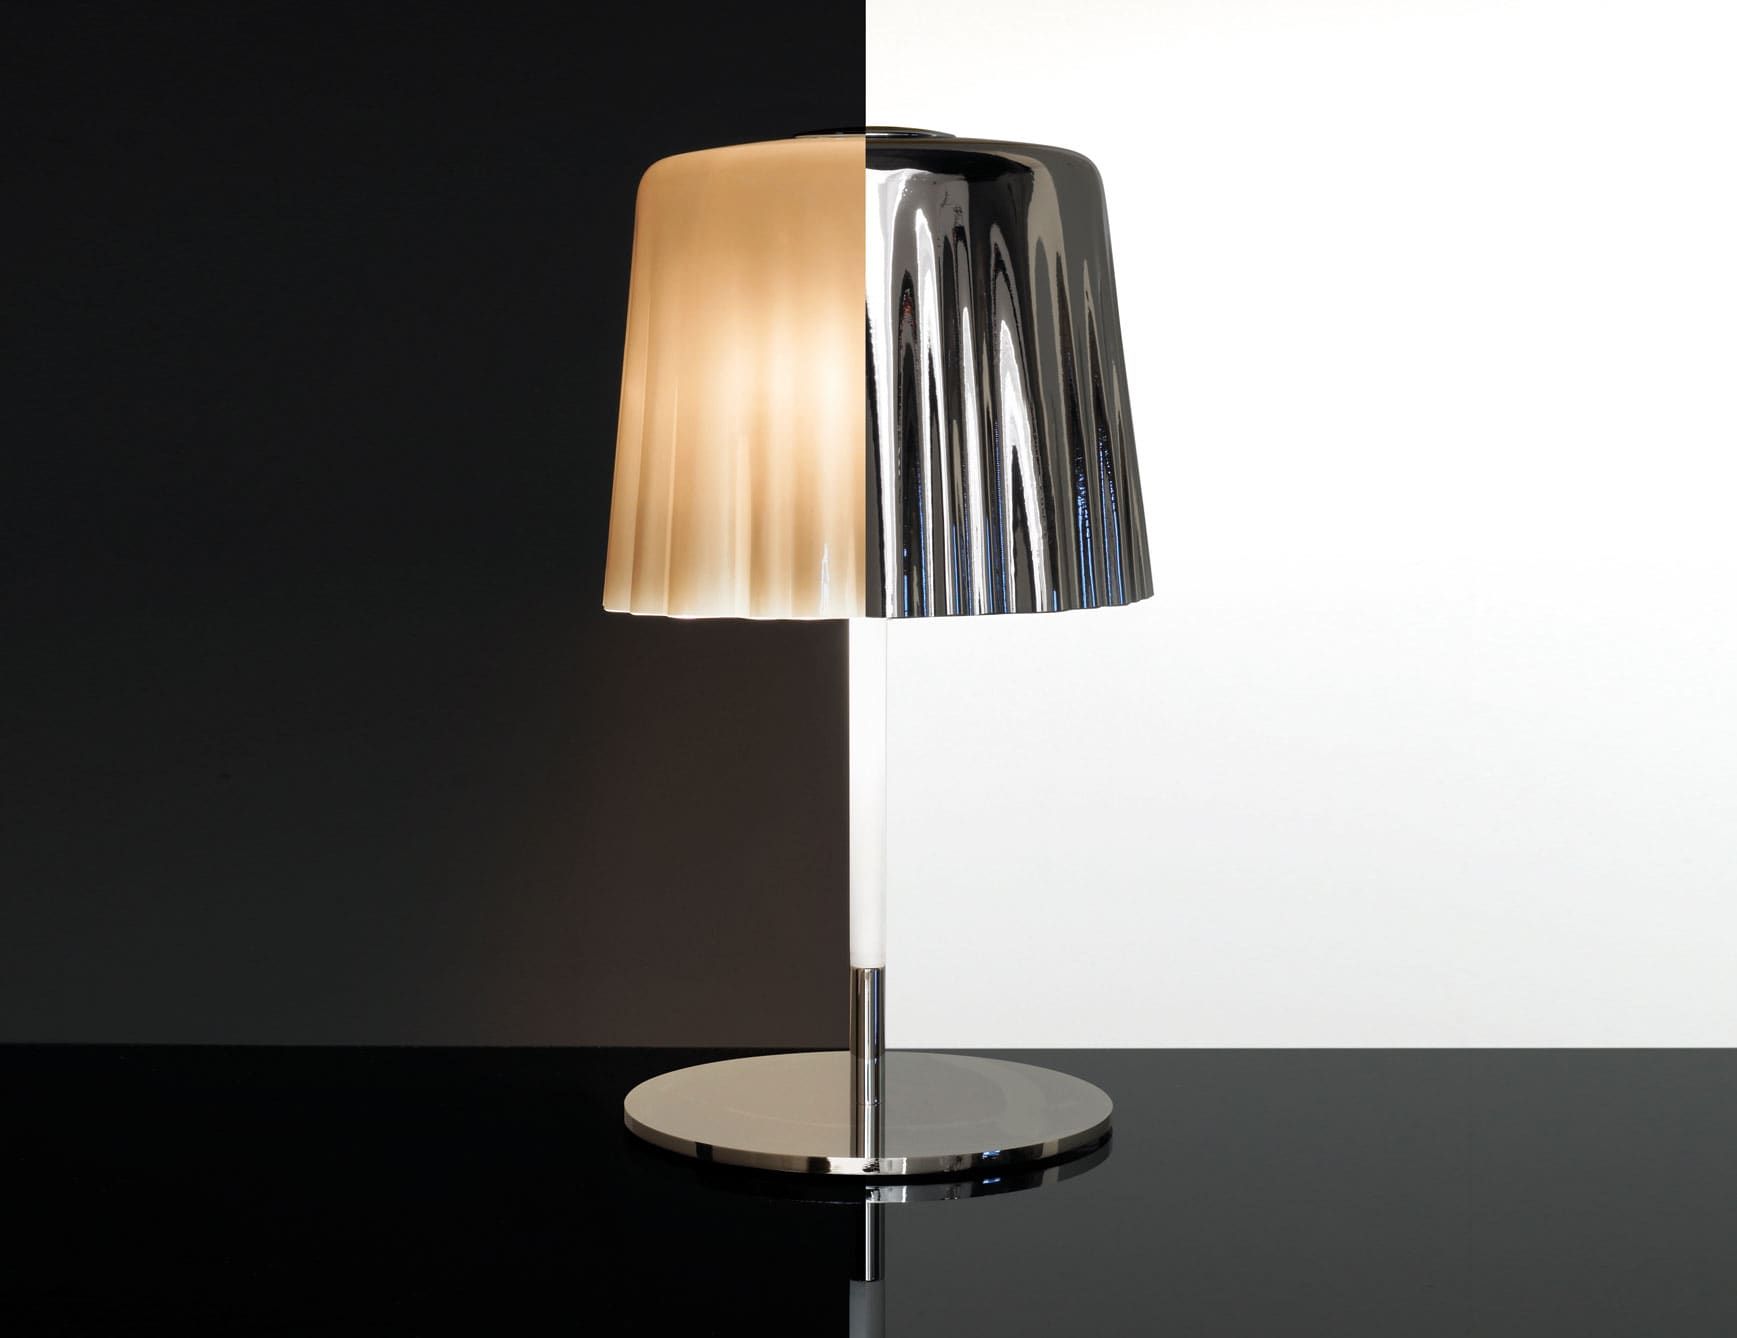 Cloth modern luxury table lamp with beige glass